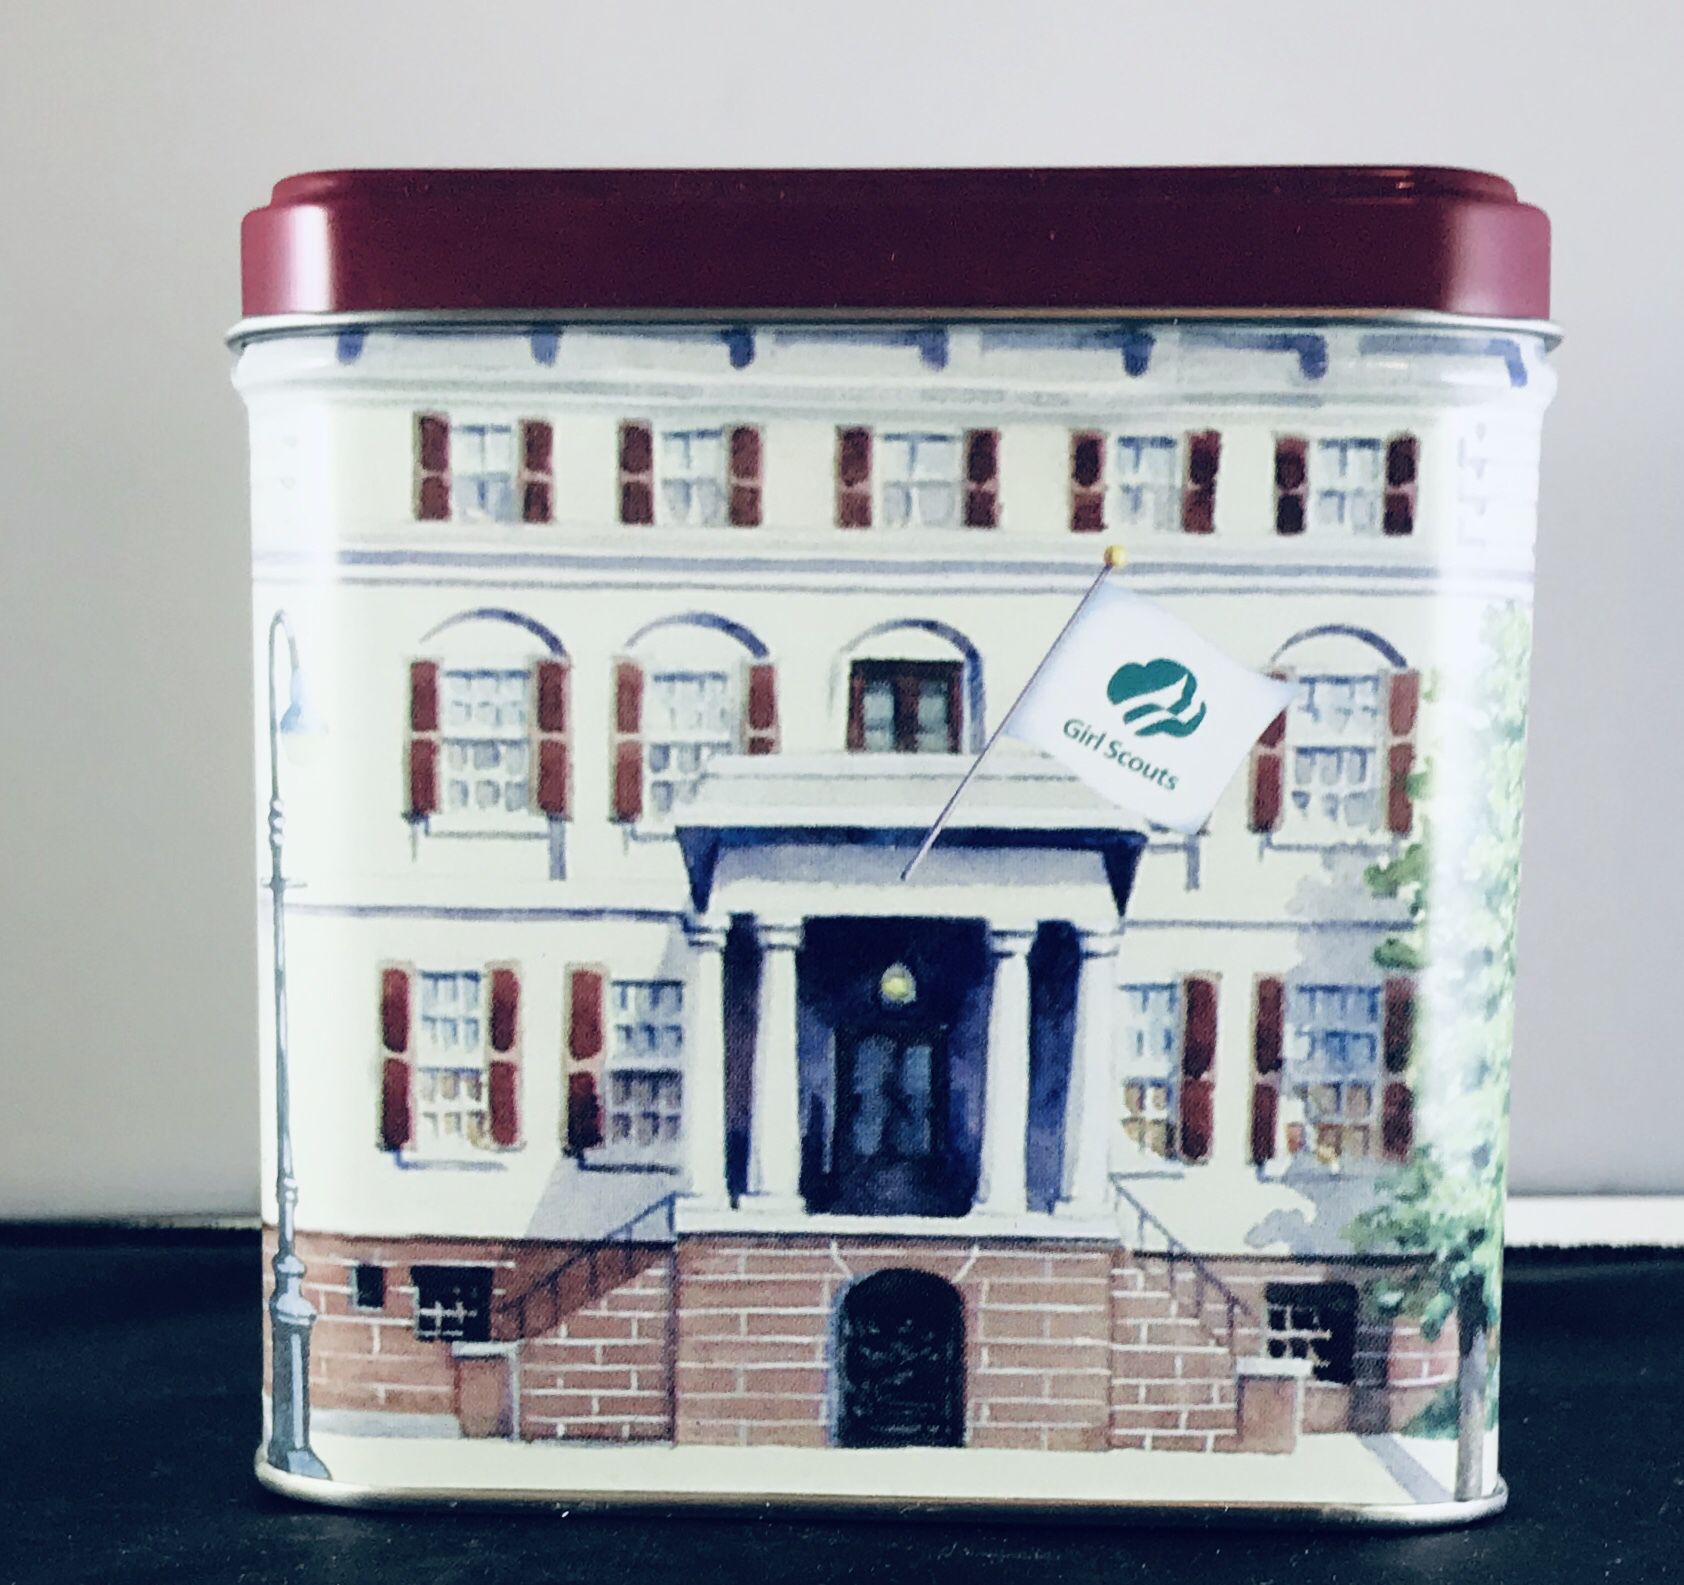 2005 Juliette Gordon Low Birthplace Collectors Tin of Childhood Home Girl Scouts